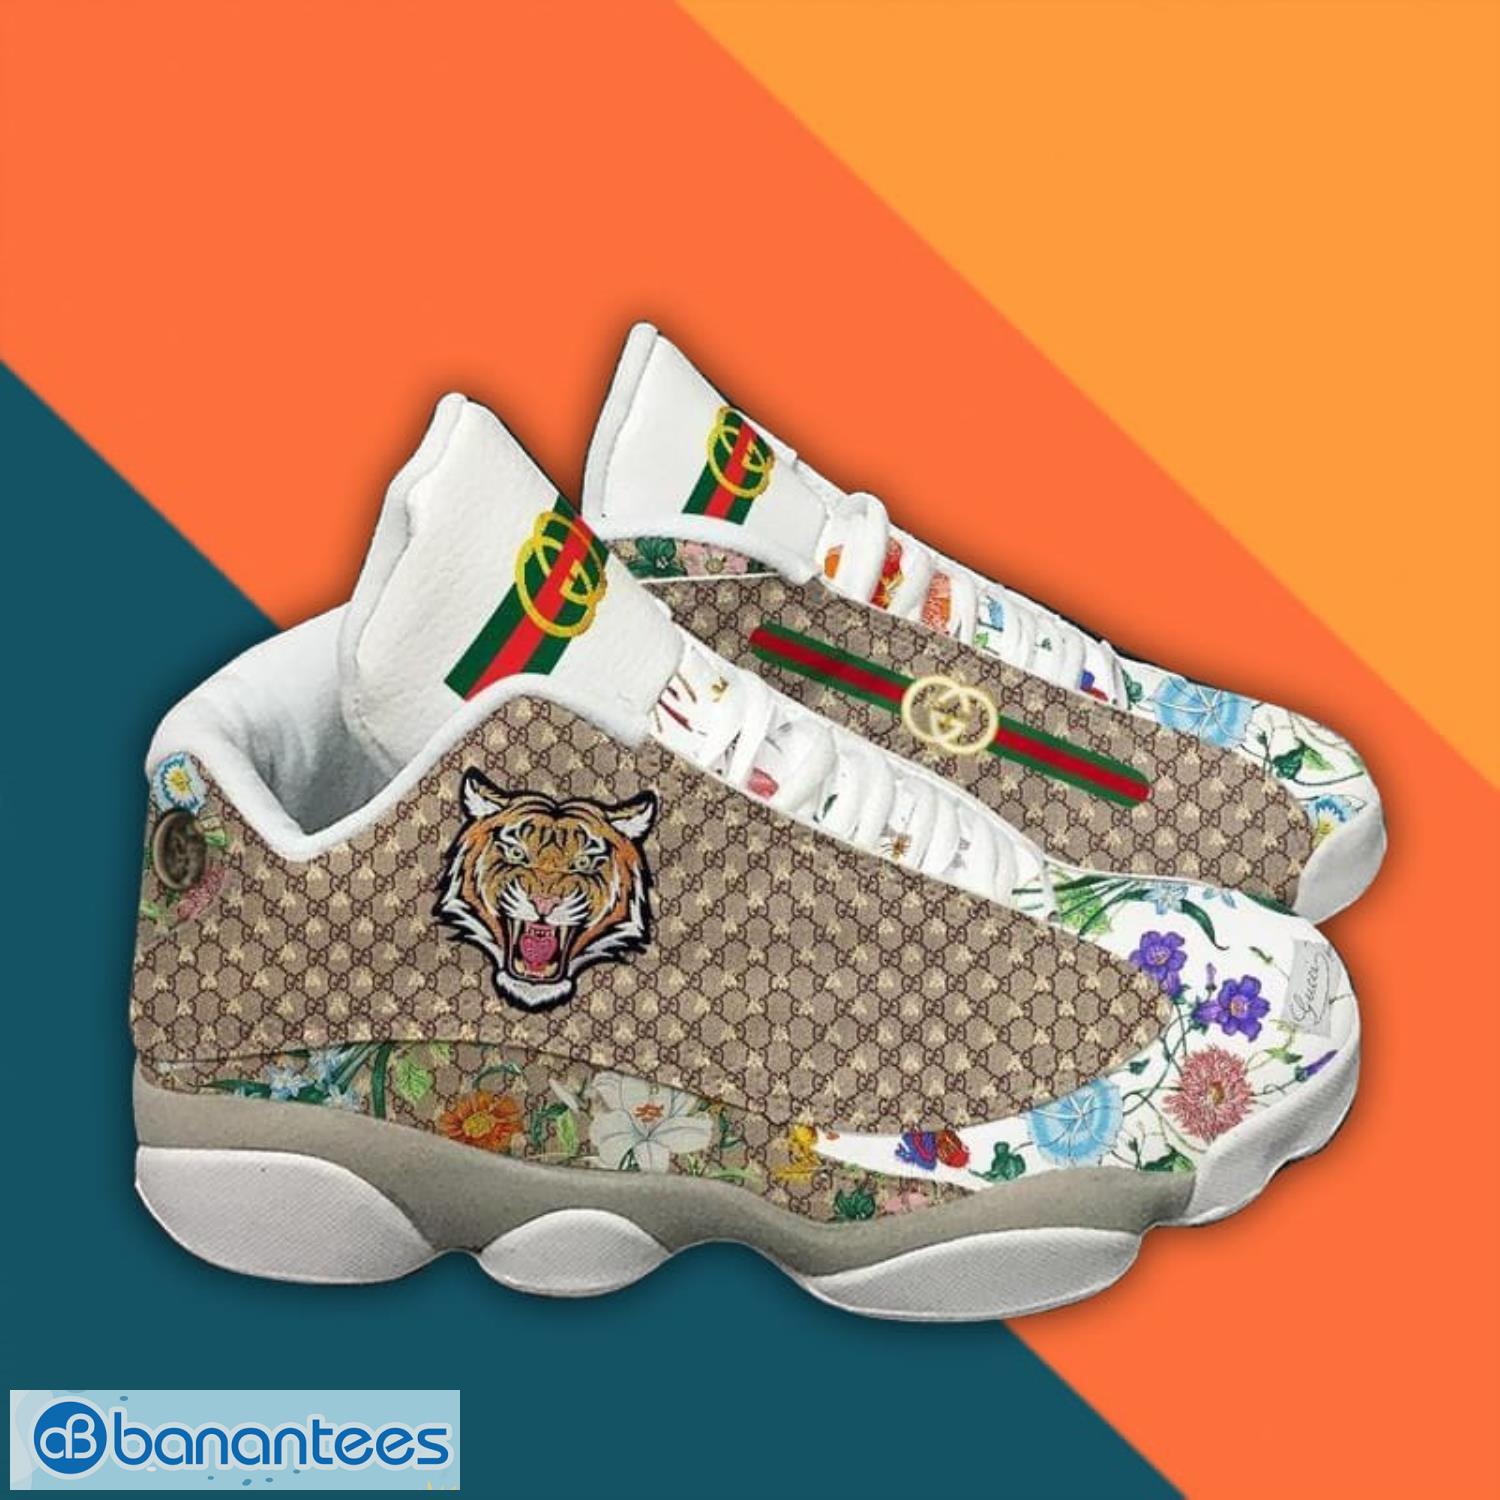 Gucci Tiger And Flowers Air Jordan 13 Sneaker Shoes Product Photo 2